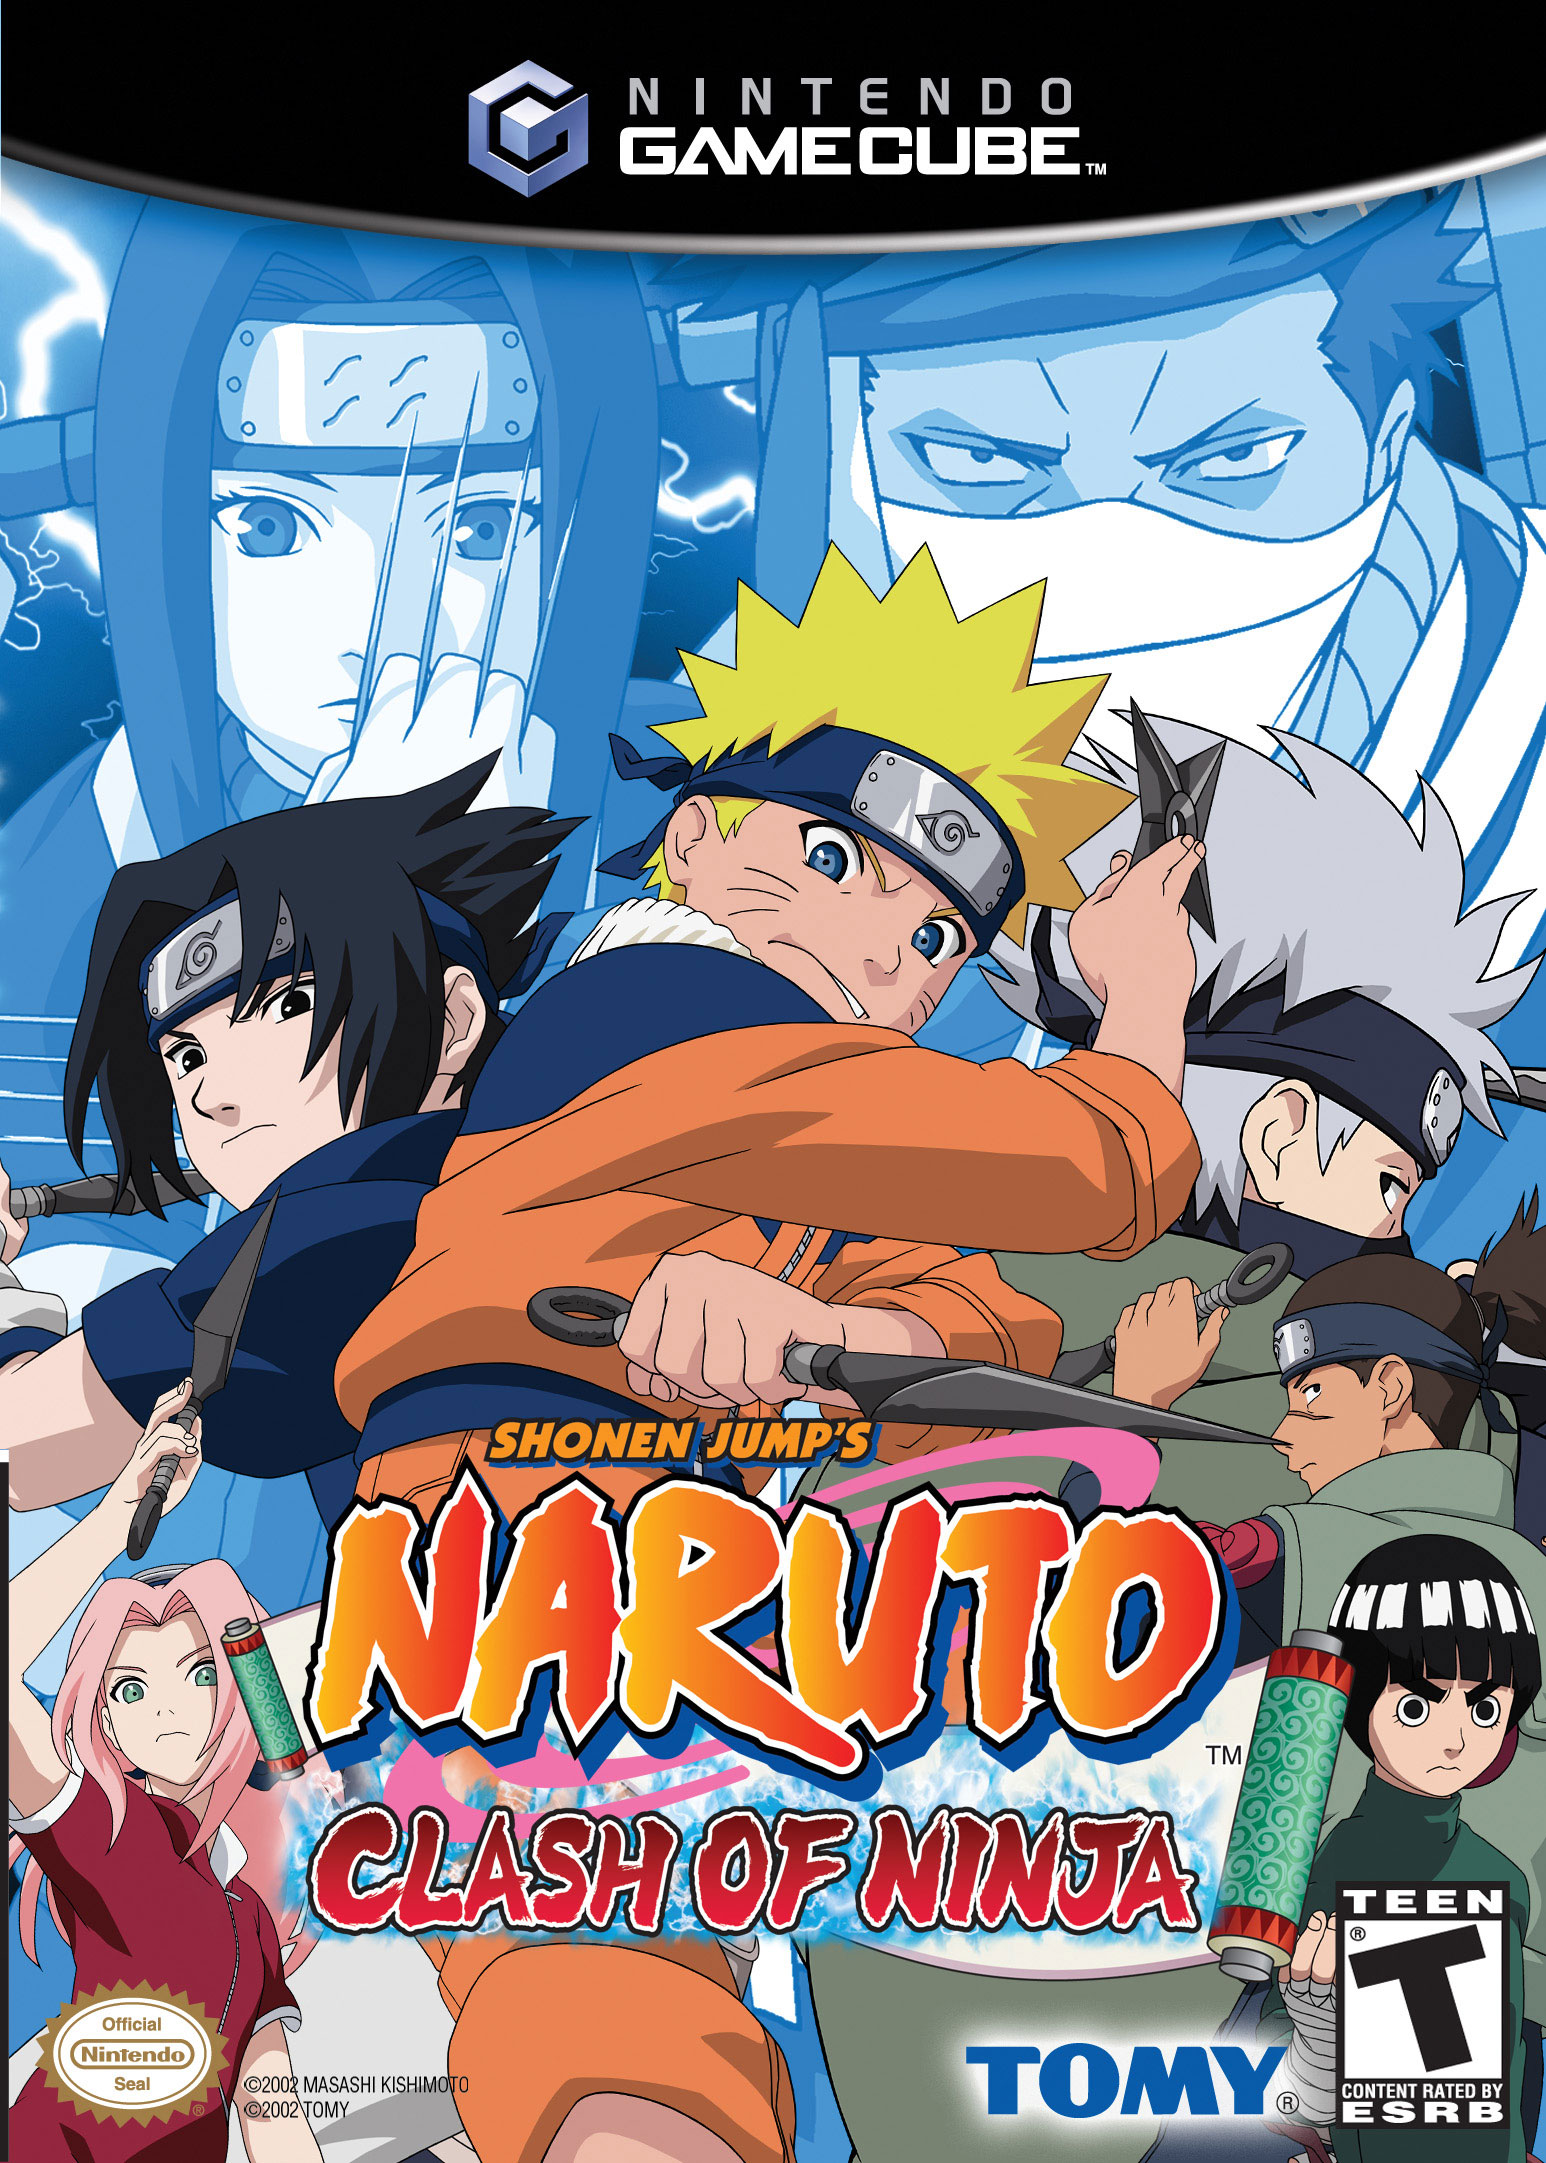 game naruto wii iso